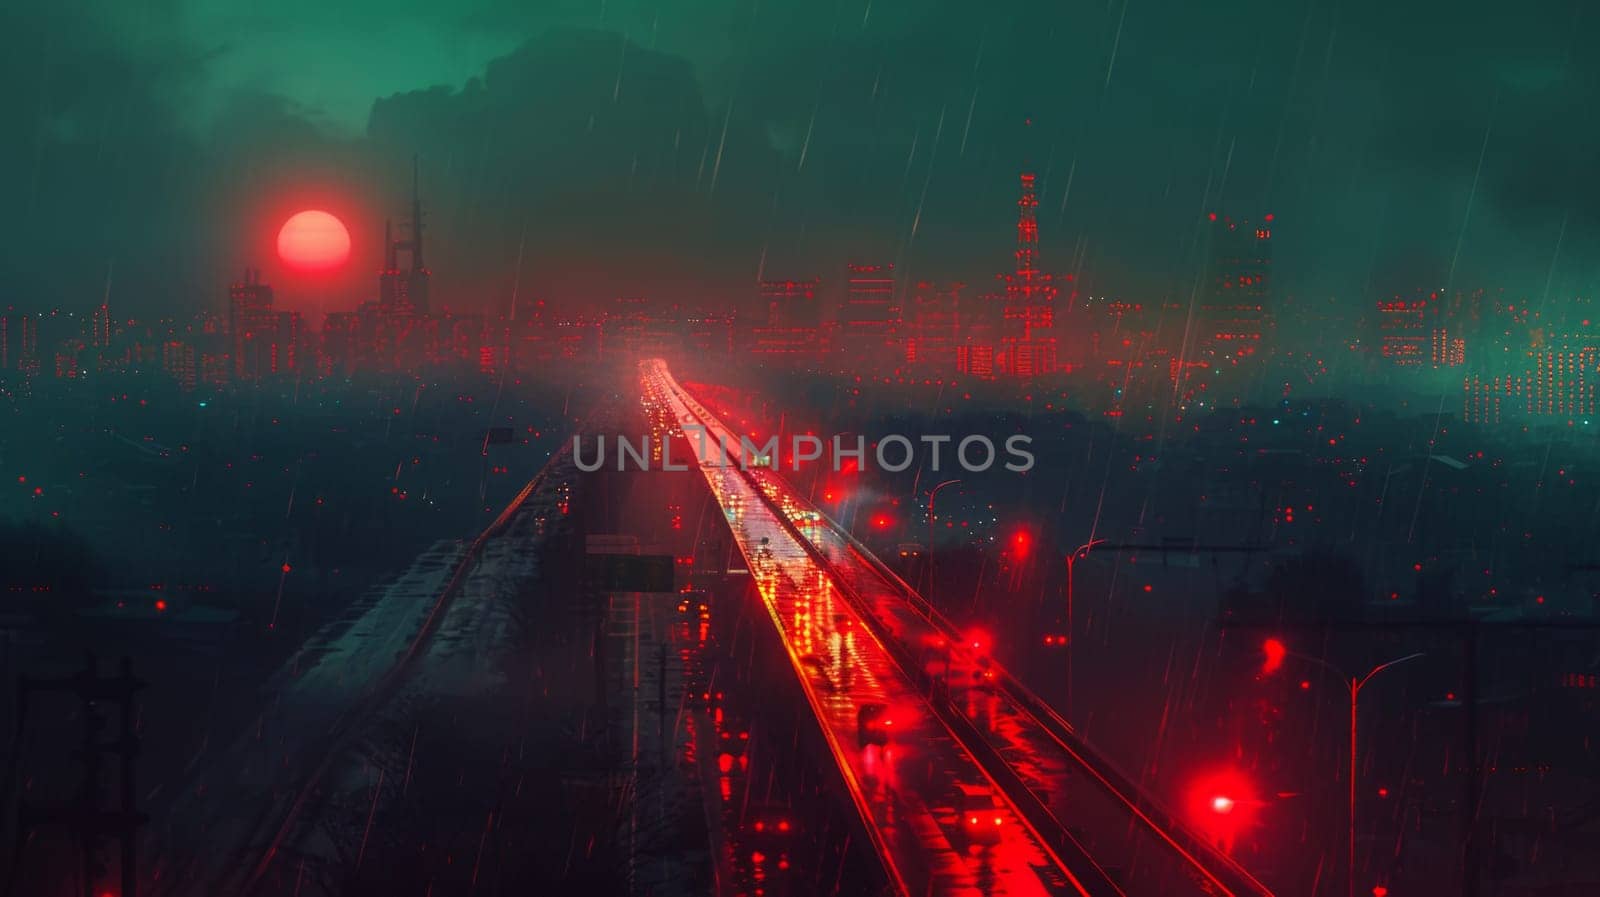 A city skyline with red lights and a train on the tracks